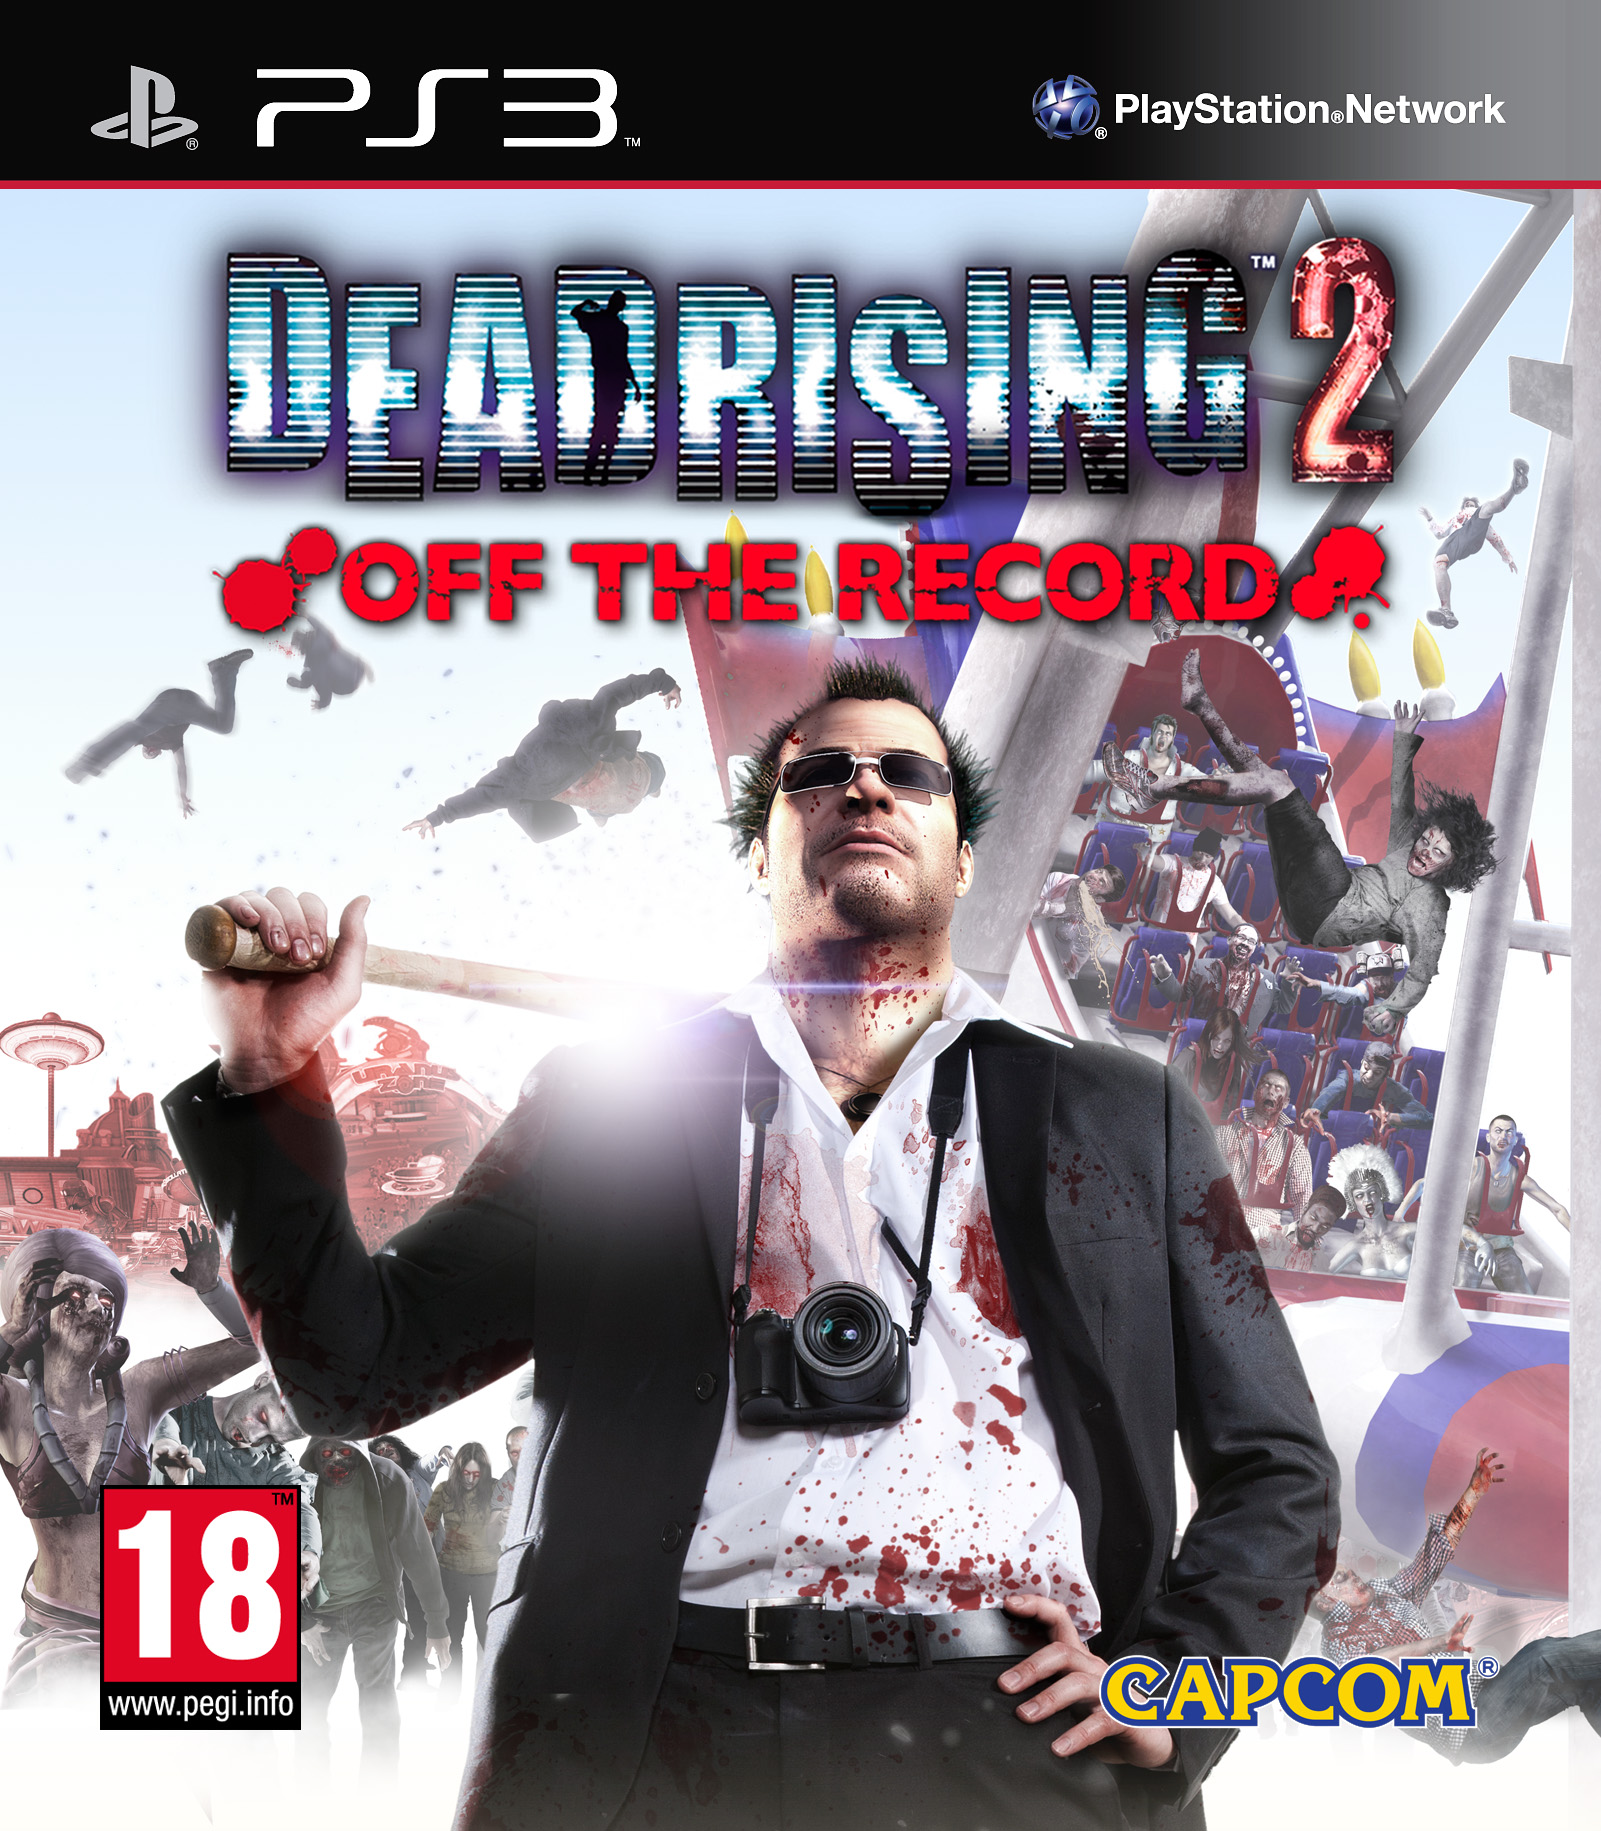 dead-rising-2-off-the-record-gets-official-box-art-rely-on-horror